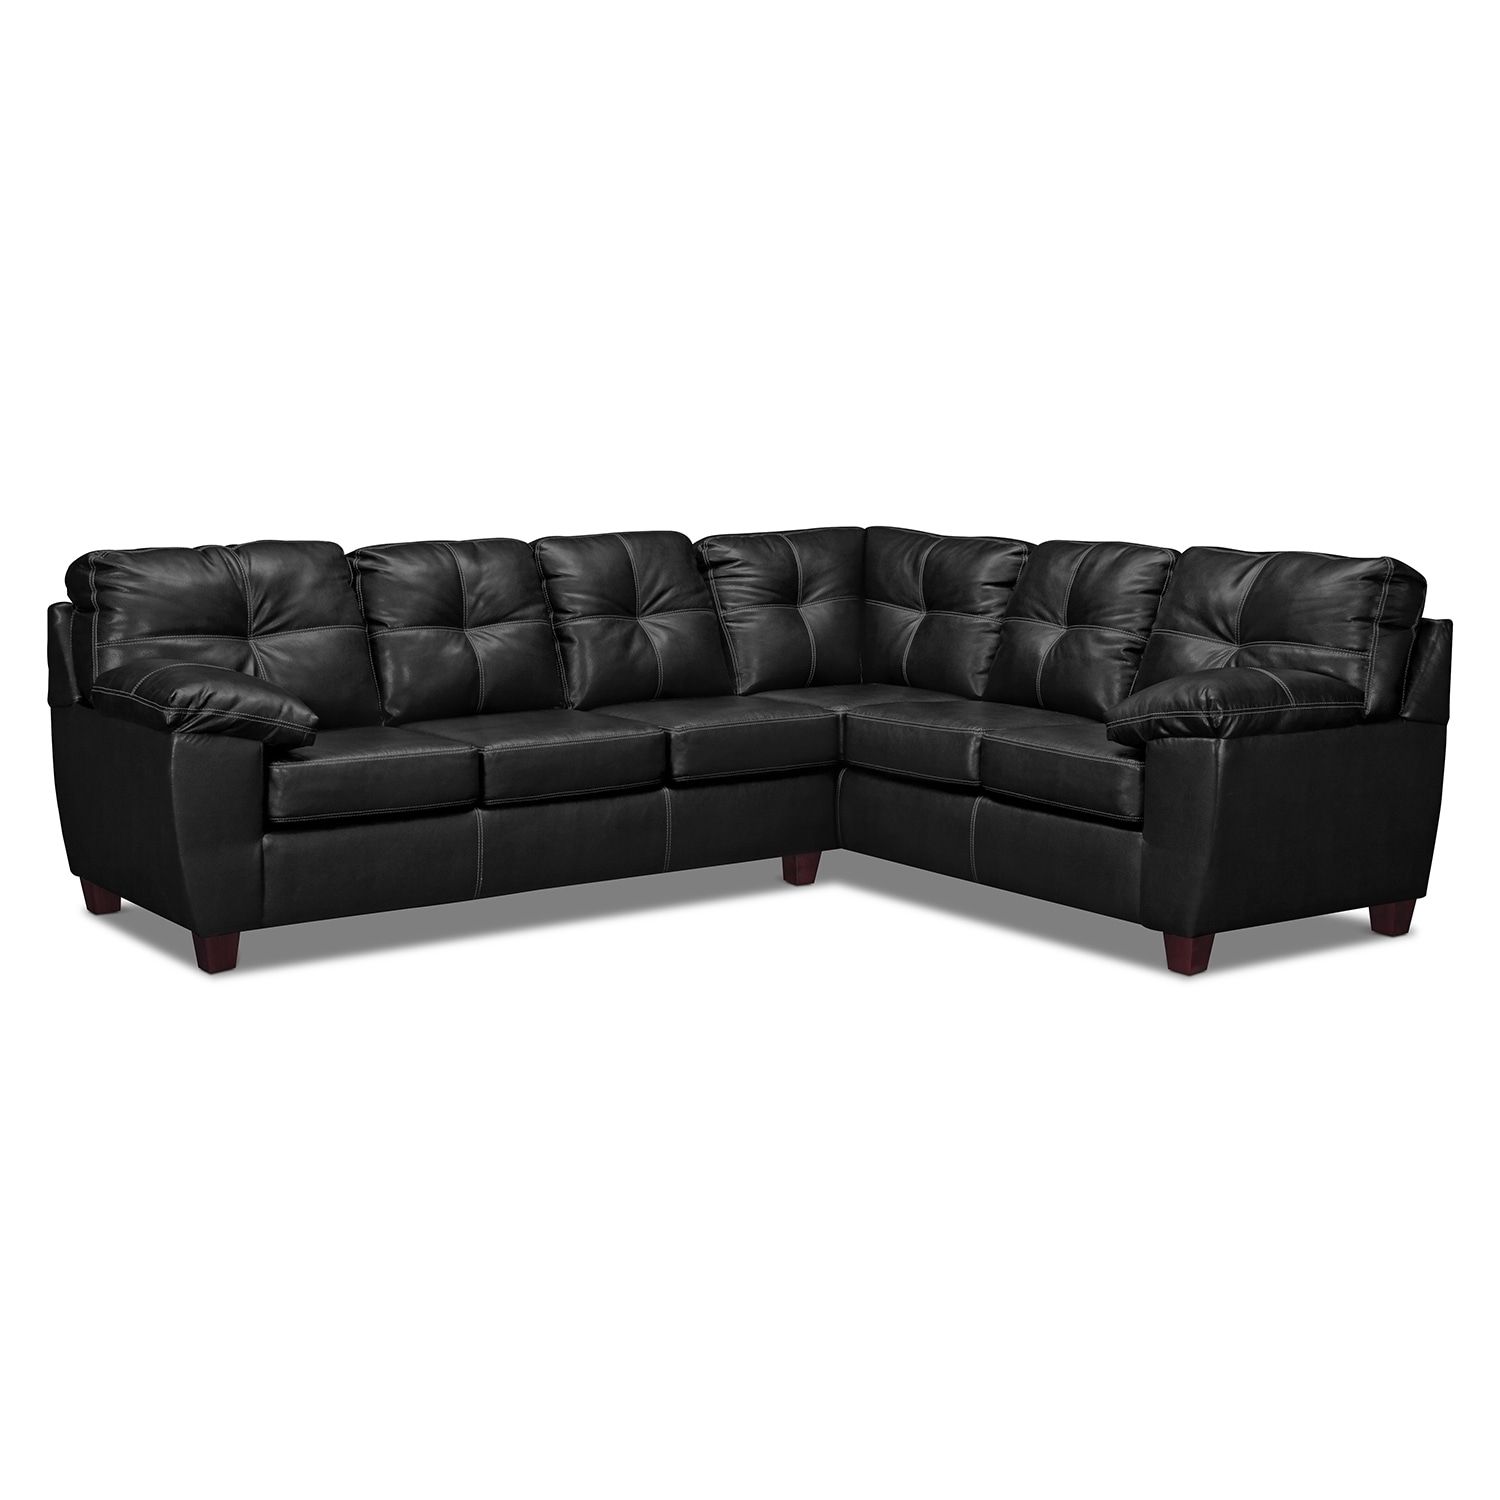 On Sale Furniture | Value City Furniture | Value City Furniture And Within Quad Cities Sectional Sofas (View 2 of 10)